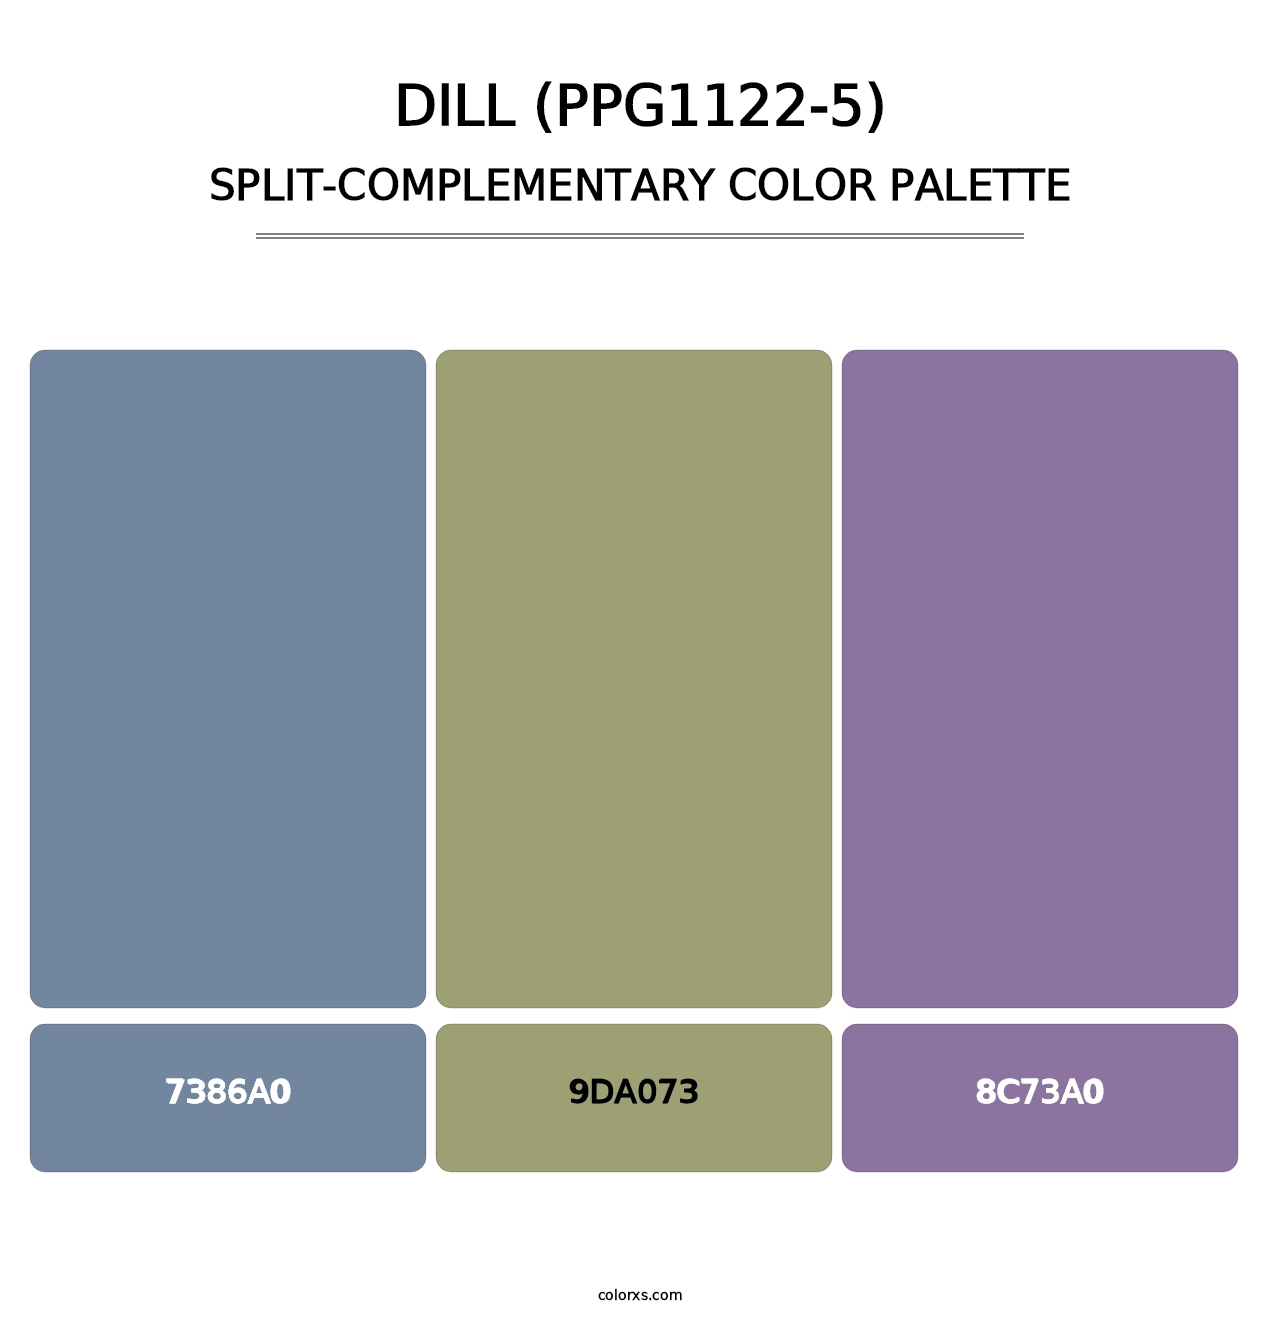 Dill (PPG1122-5) - Split-Complementary Color Palette